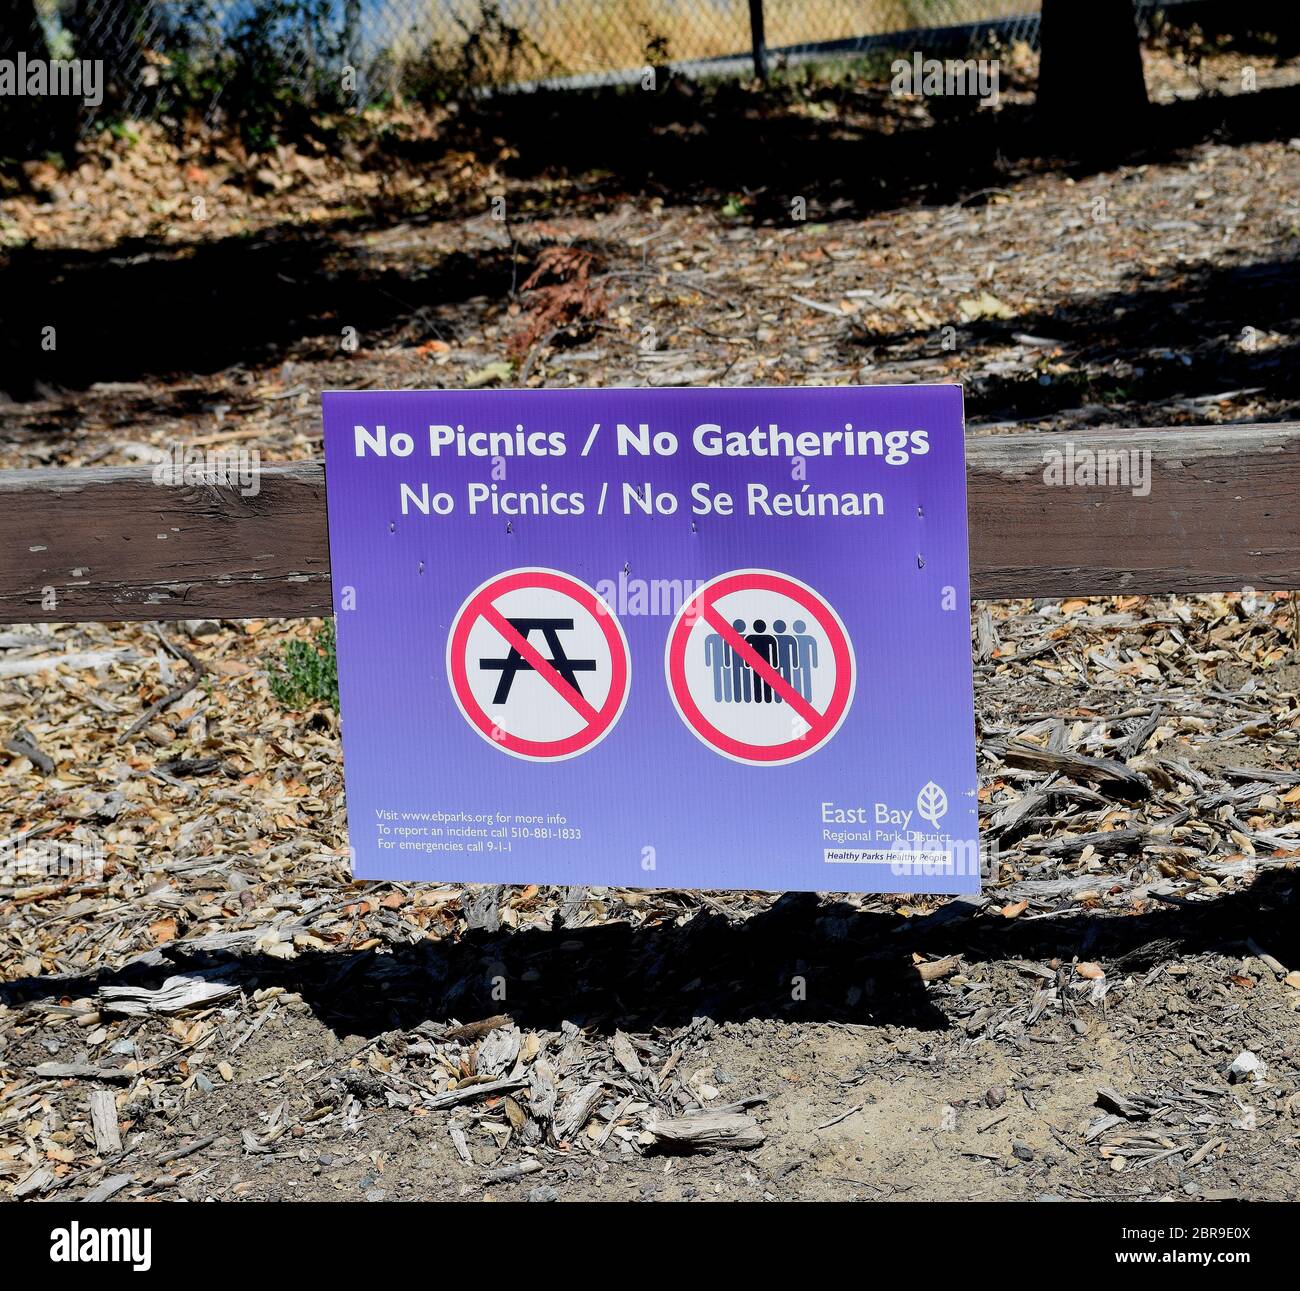 No Picnics, no social gatherings sign at Alameda Creek Regional Trail, Isherwood Staging Area parking lot in Fremont, California Stock Photo